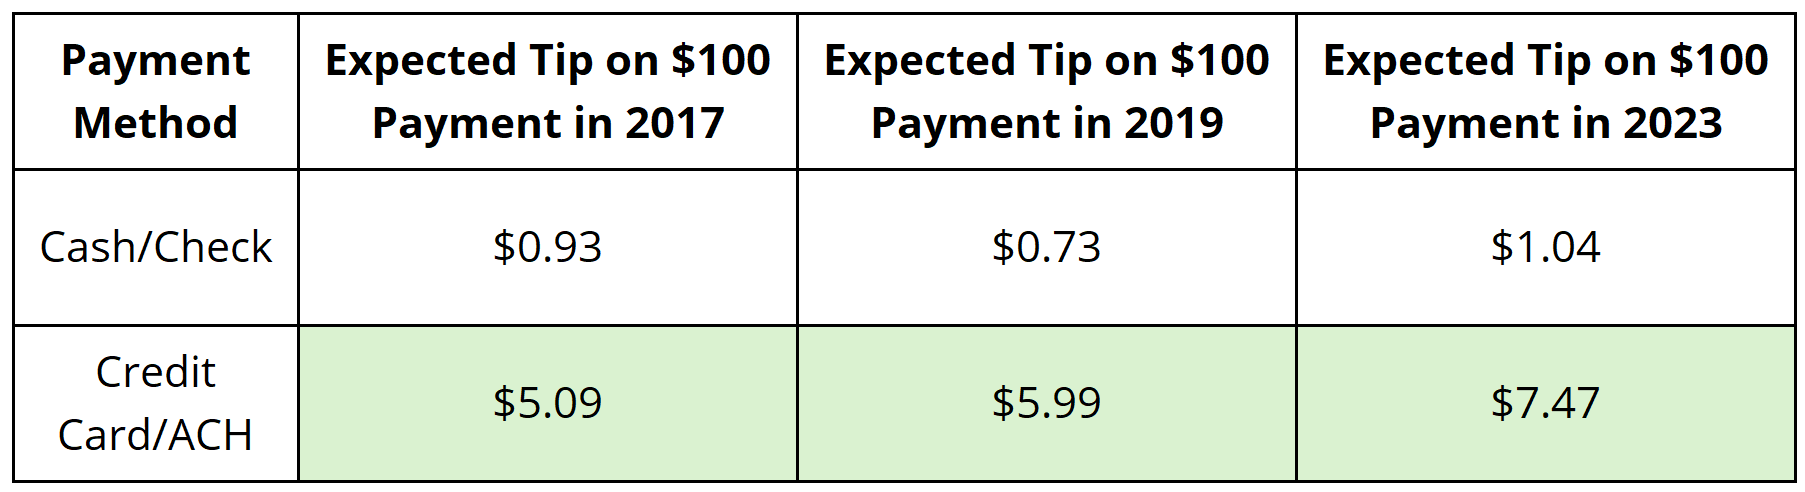 Expected Tip Data on $100 Payment in Time To Pet